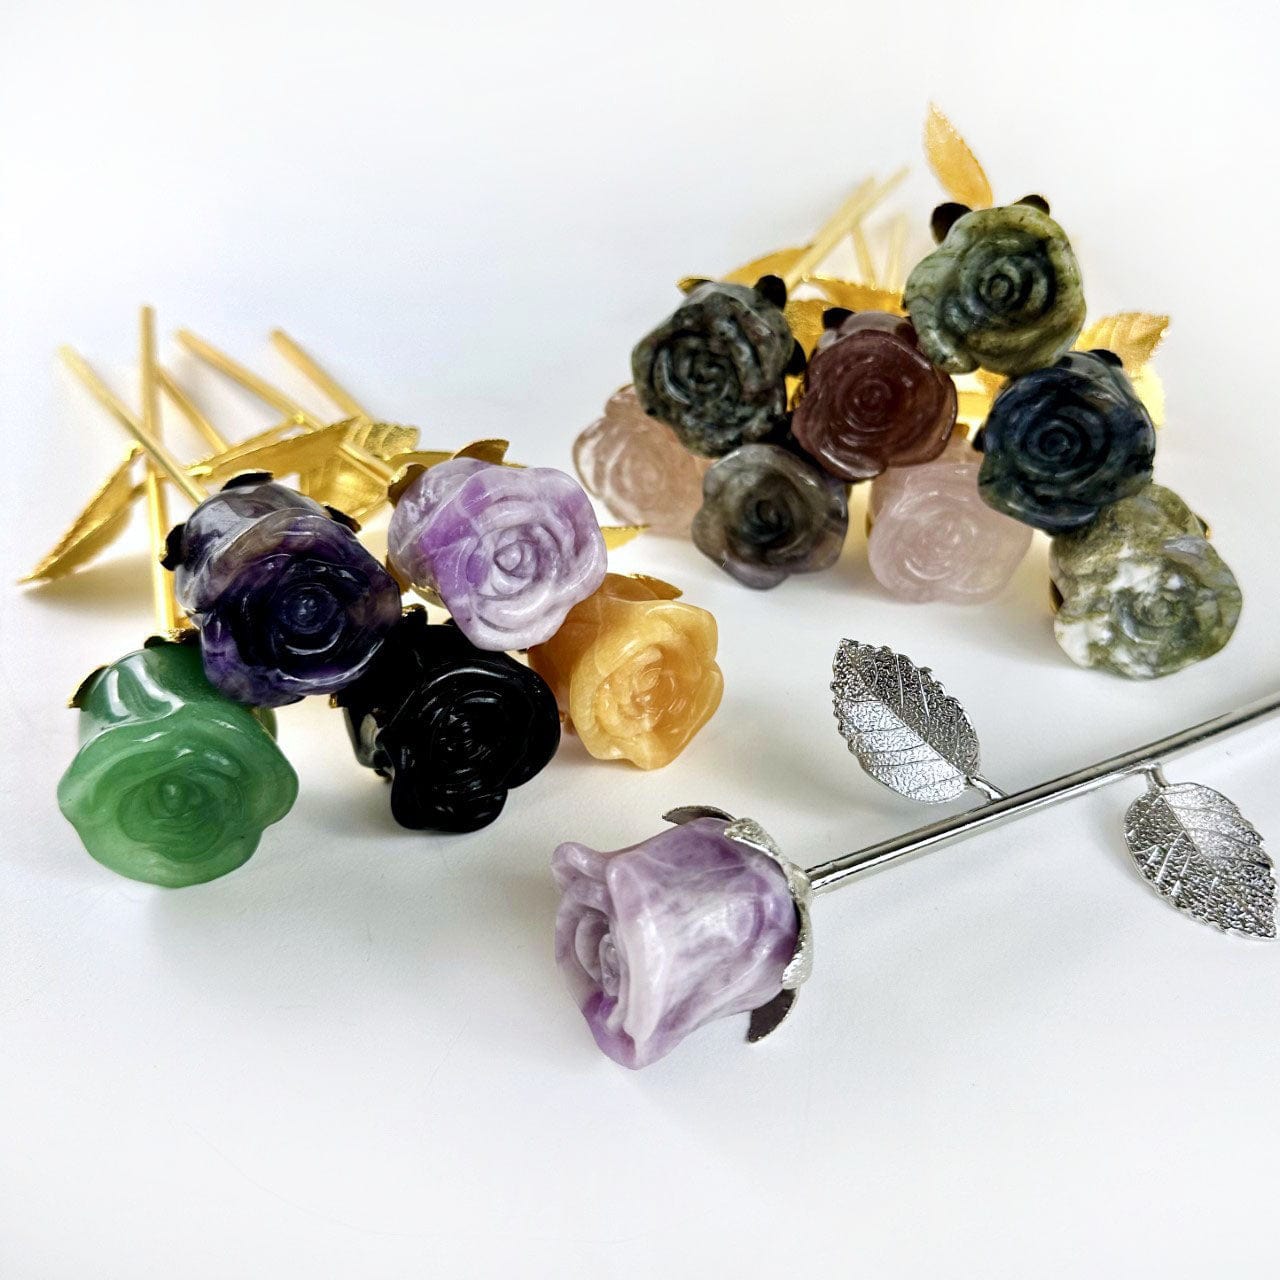 Crystal Rose - Carved Stones shown with gold and silver stems and leaves